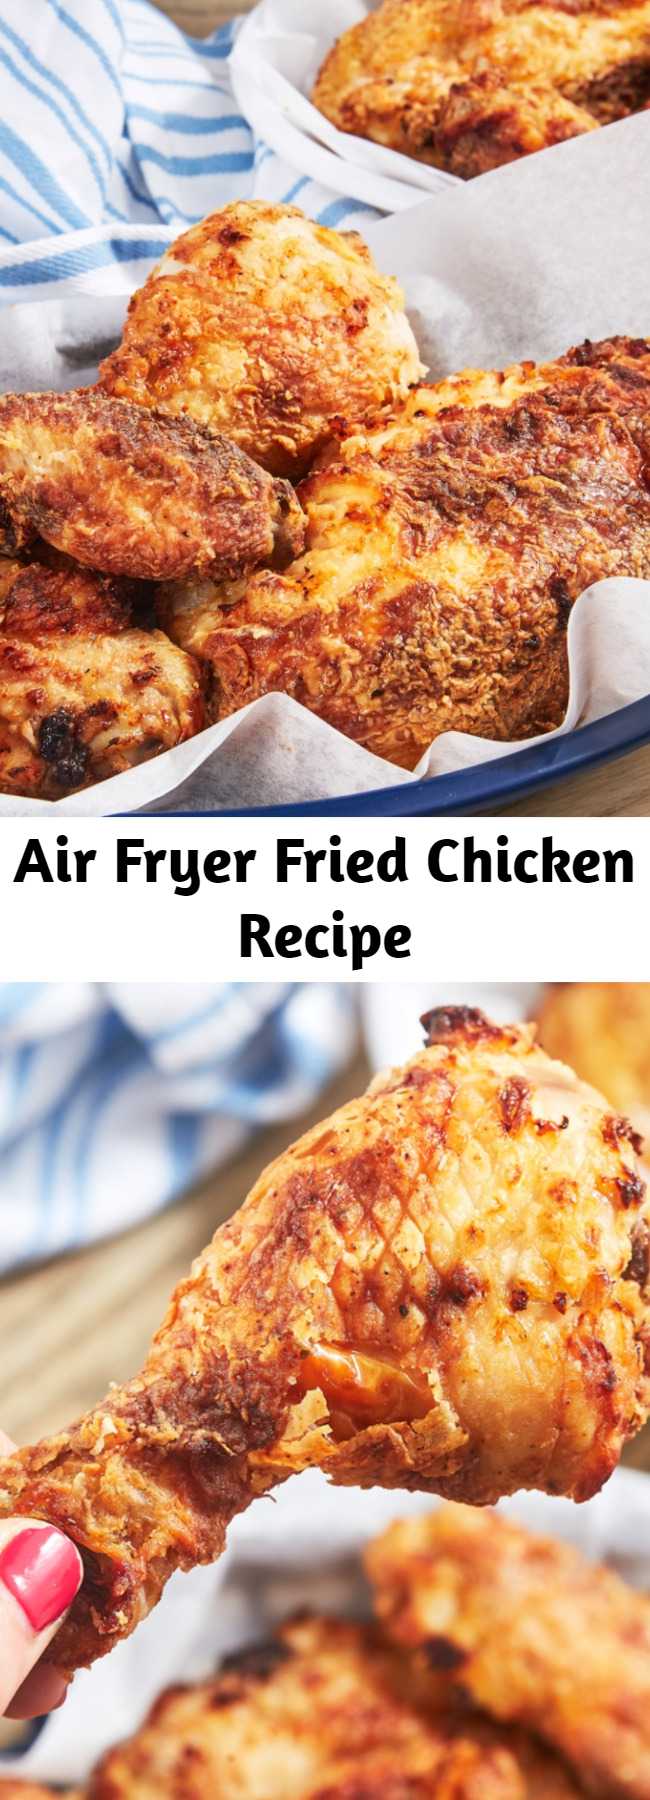 Air Fryer Fried Chicken Recipe - Imagine the best fried chicken you've ever had. Now imagine if it wasn't even fried. Crazy, right? Not with this easy air-fryer fried chicken recipe! The air fryer works some kind of magic on the chicken, and it crisps up into perfectly crunchy chicken as if it had been deep-fried. That buttermilk marinade makes the chicken so tender and juicy and gives it just the right amount of heat. It might just be our favorite chicken recipe ever.